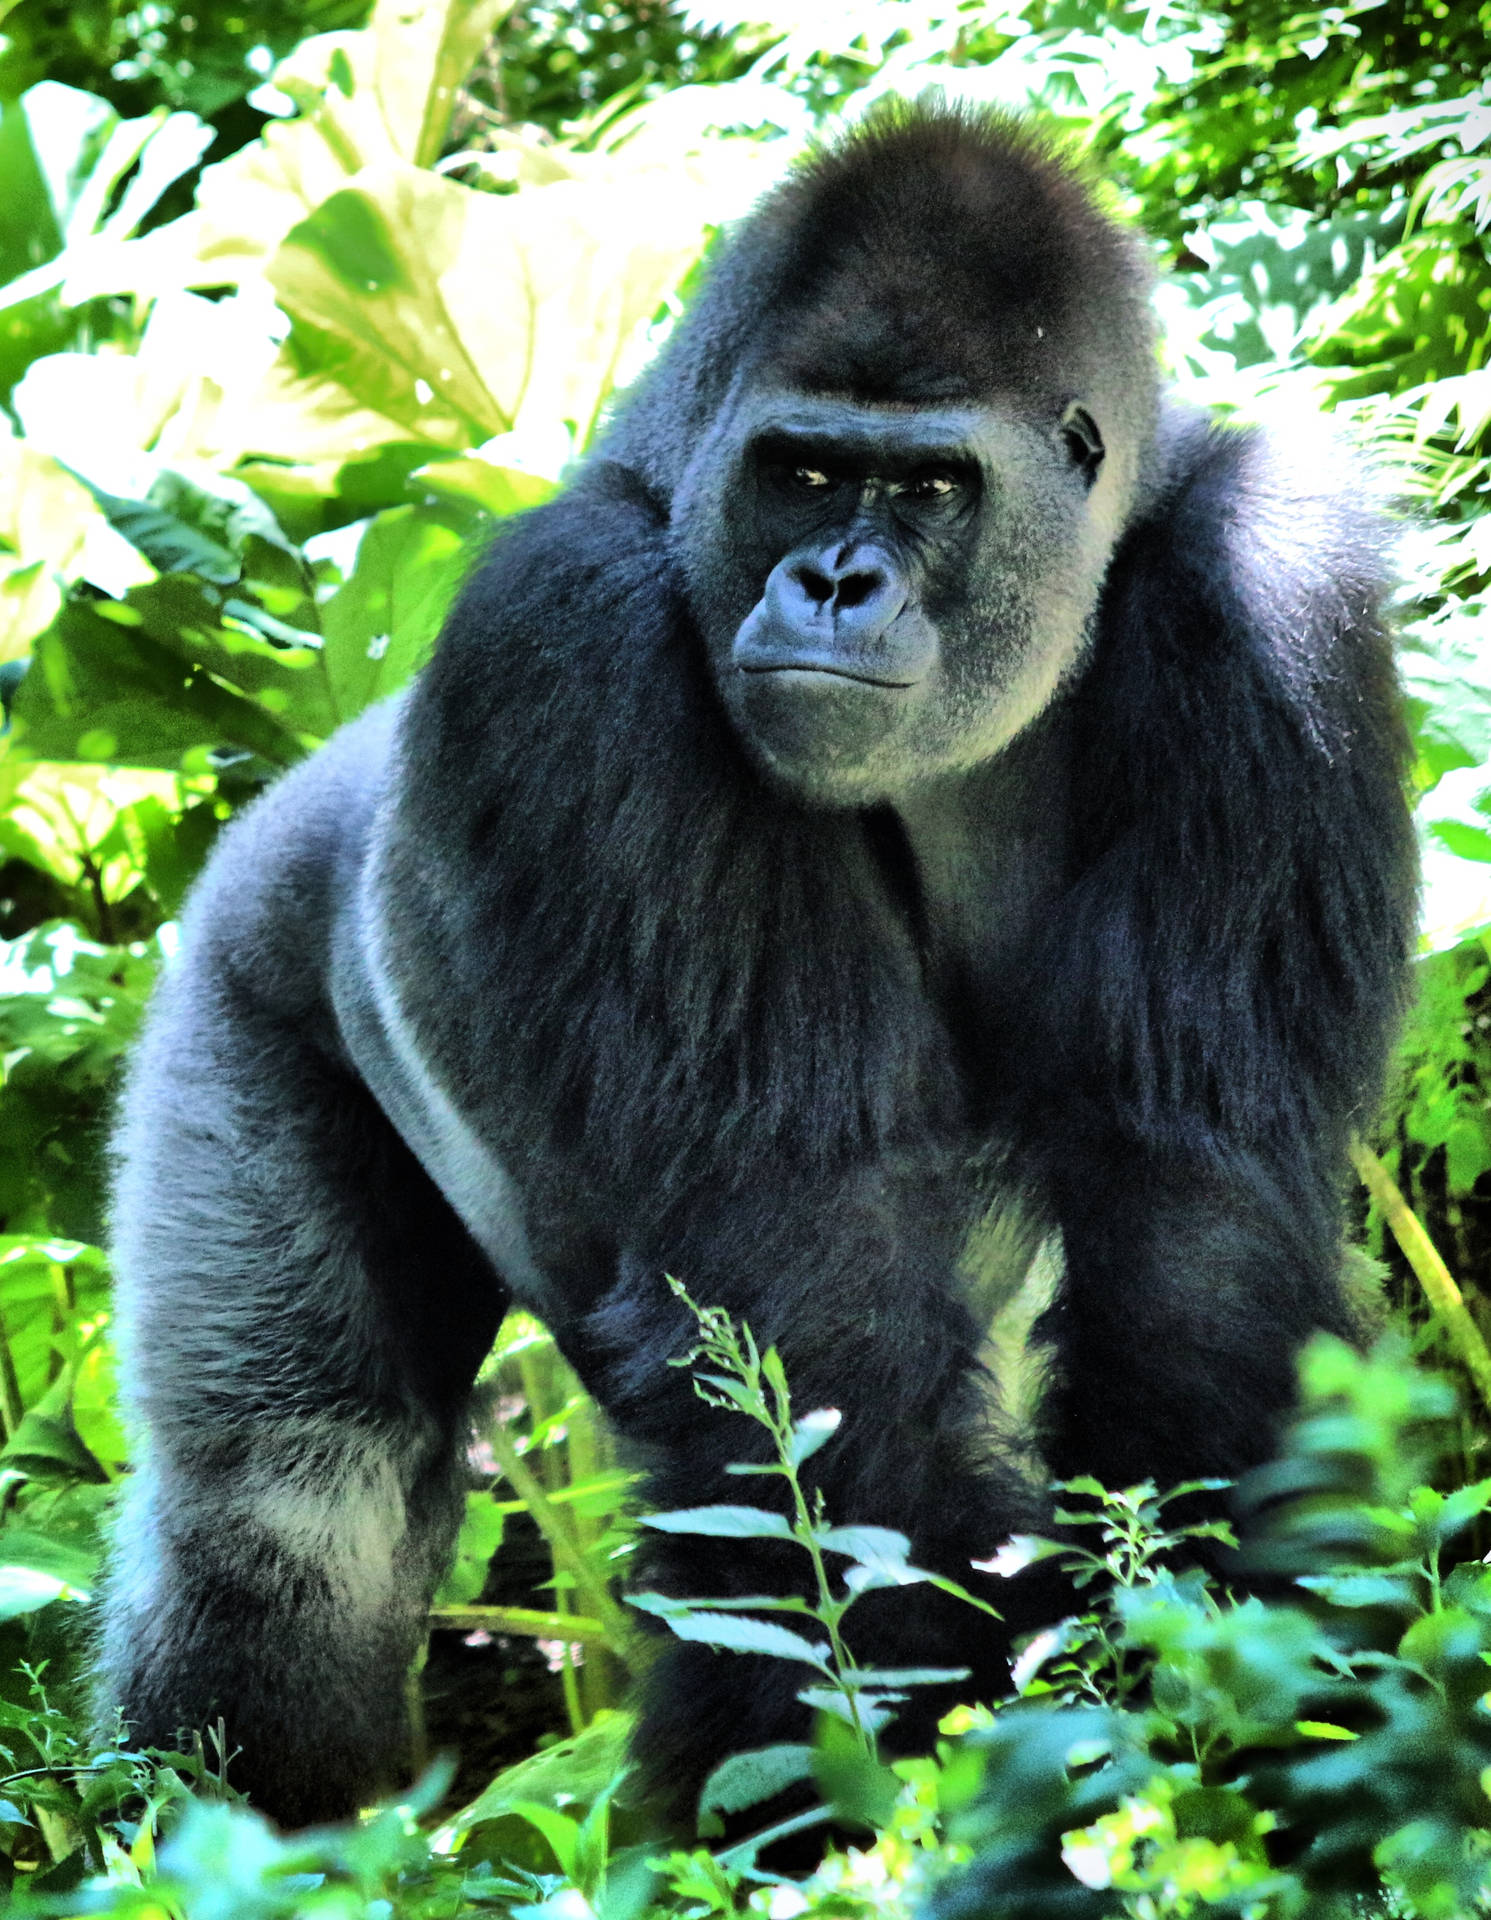 Gorilla 2386X3072 Wallpaper and Background Image